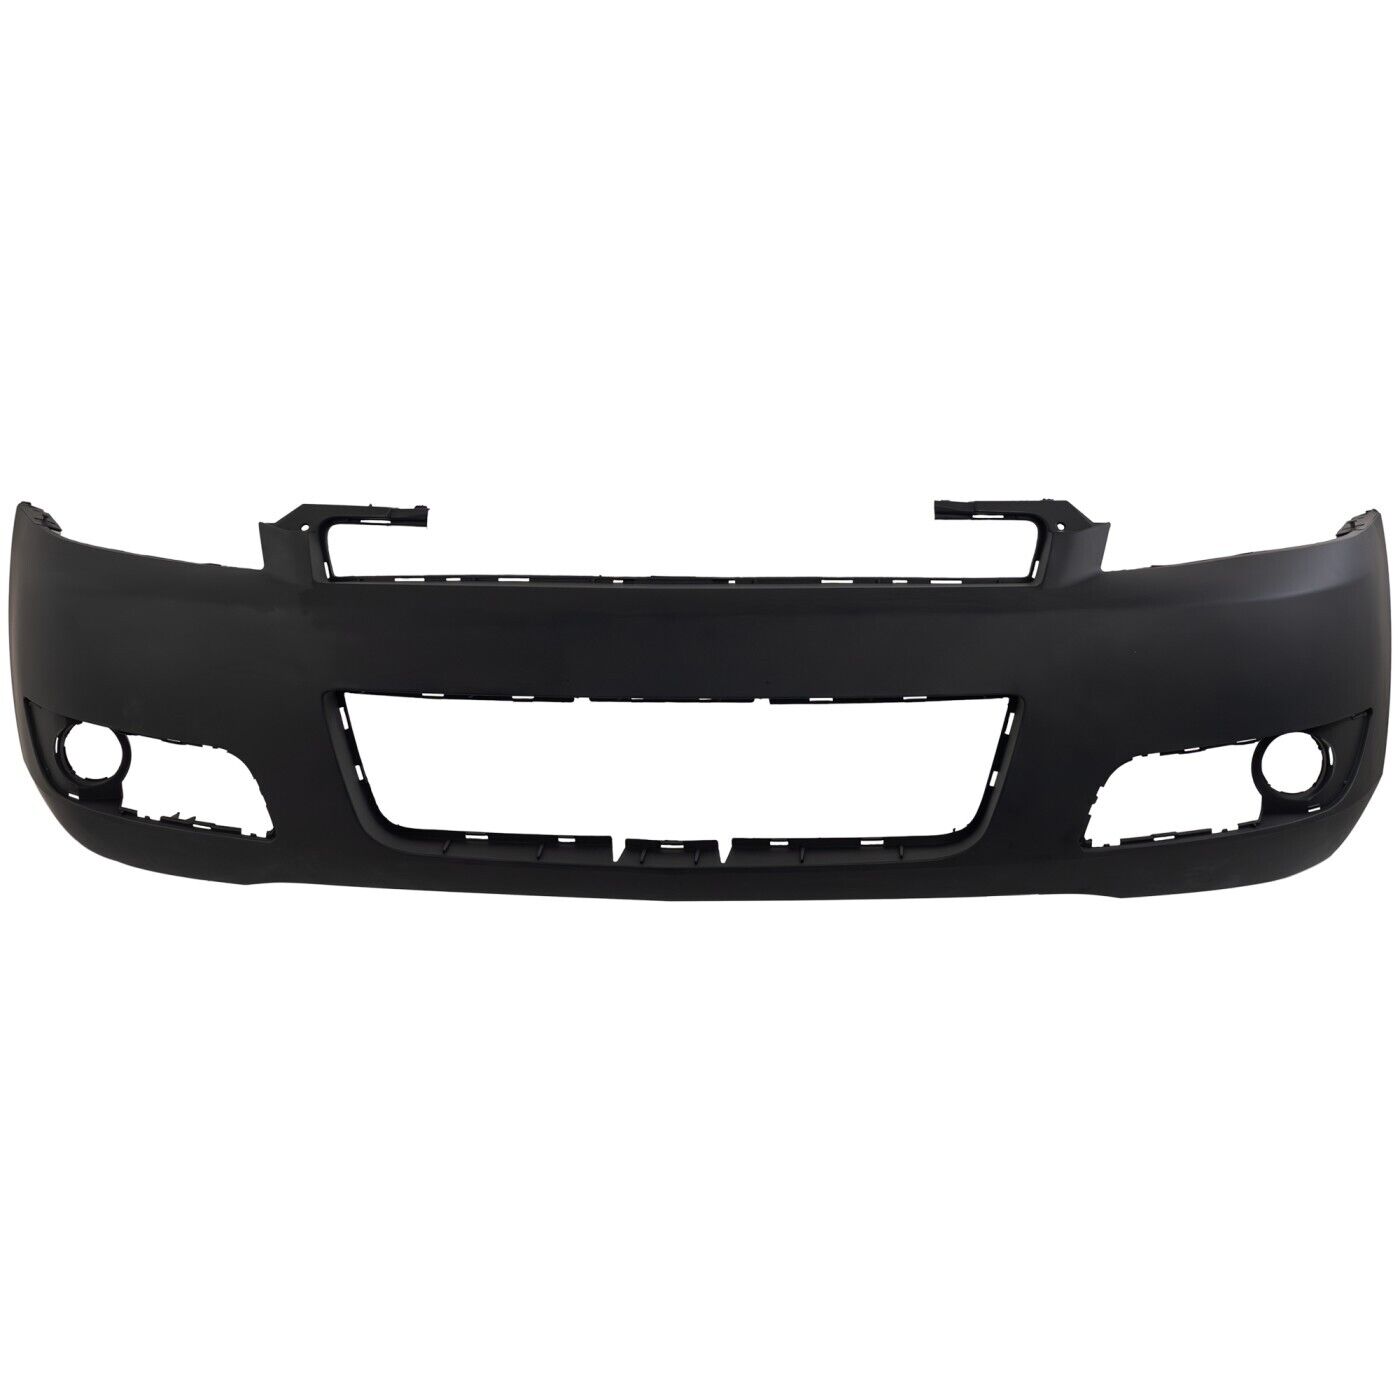 Front Bumper Cover For 2006-13 Chevrolet Impala/2014-16 Impala Limited Primed